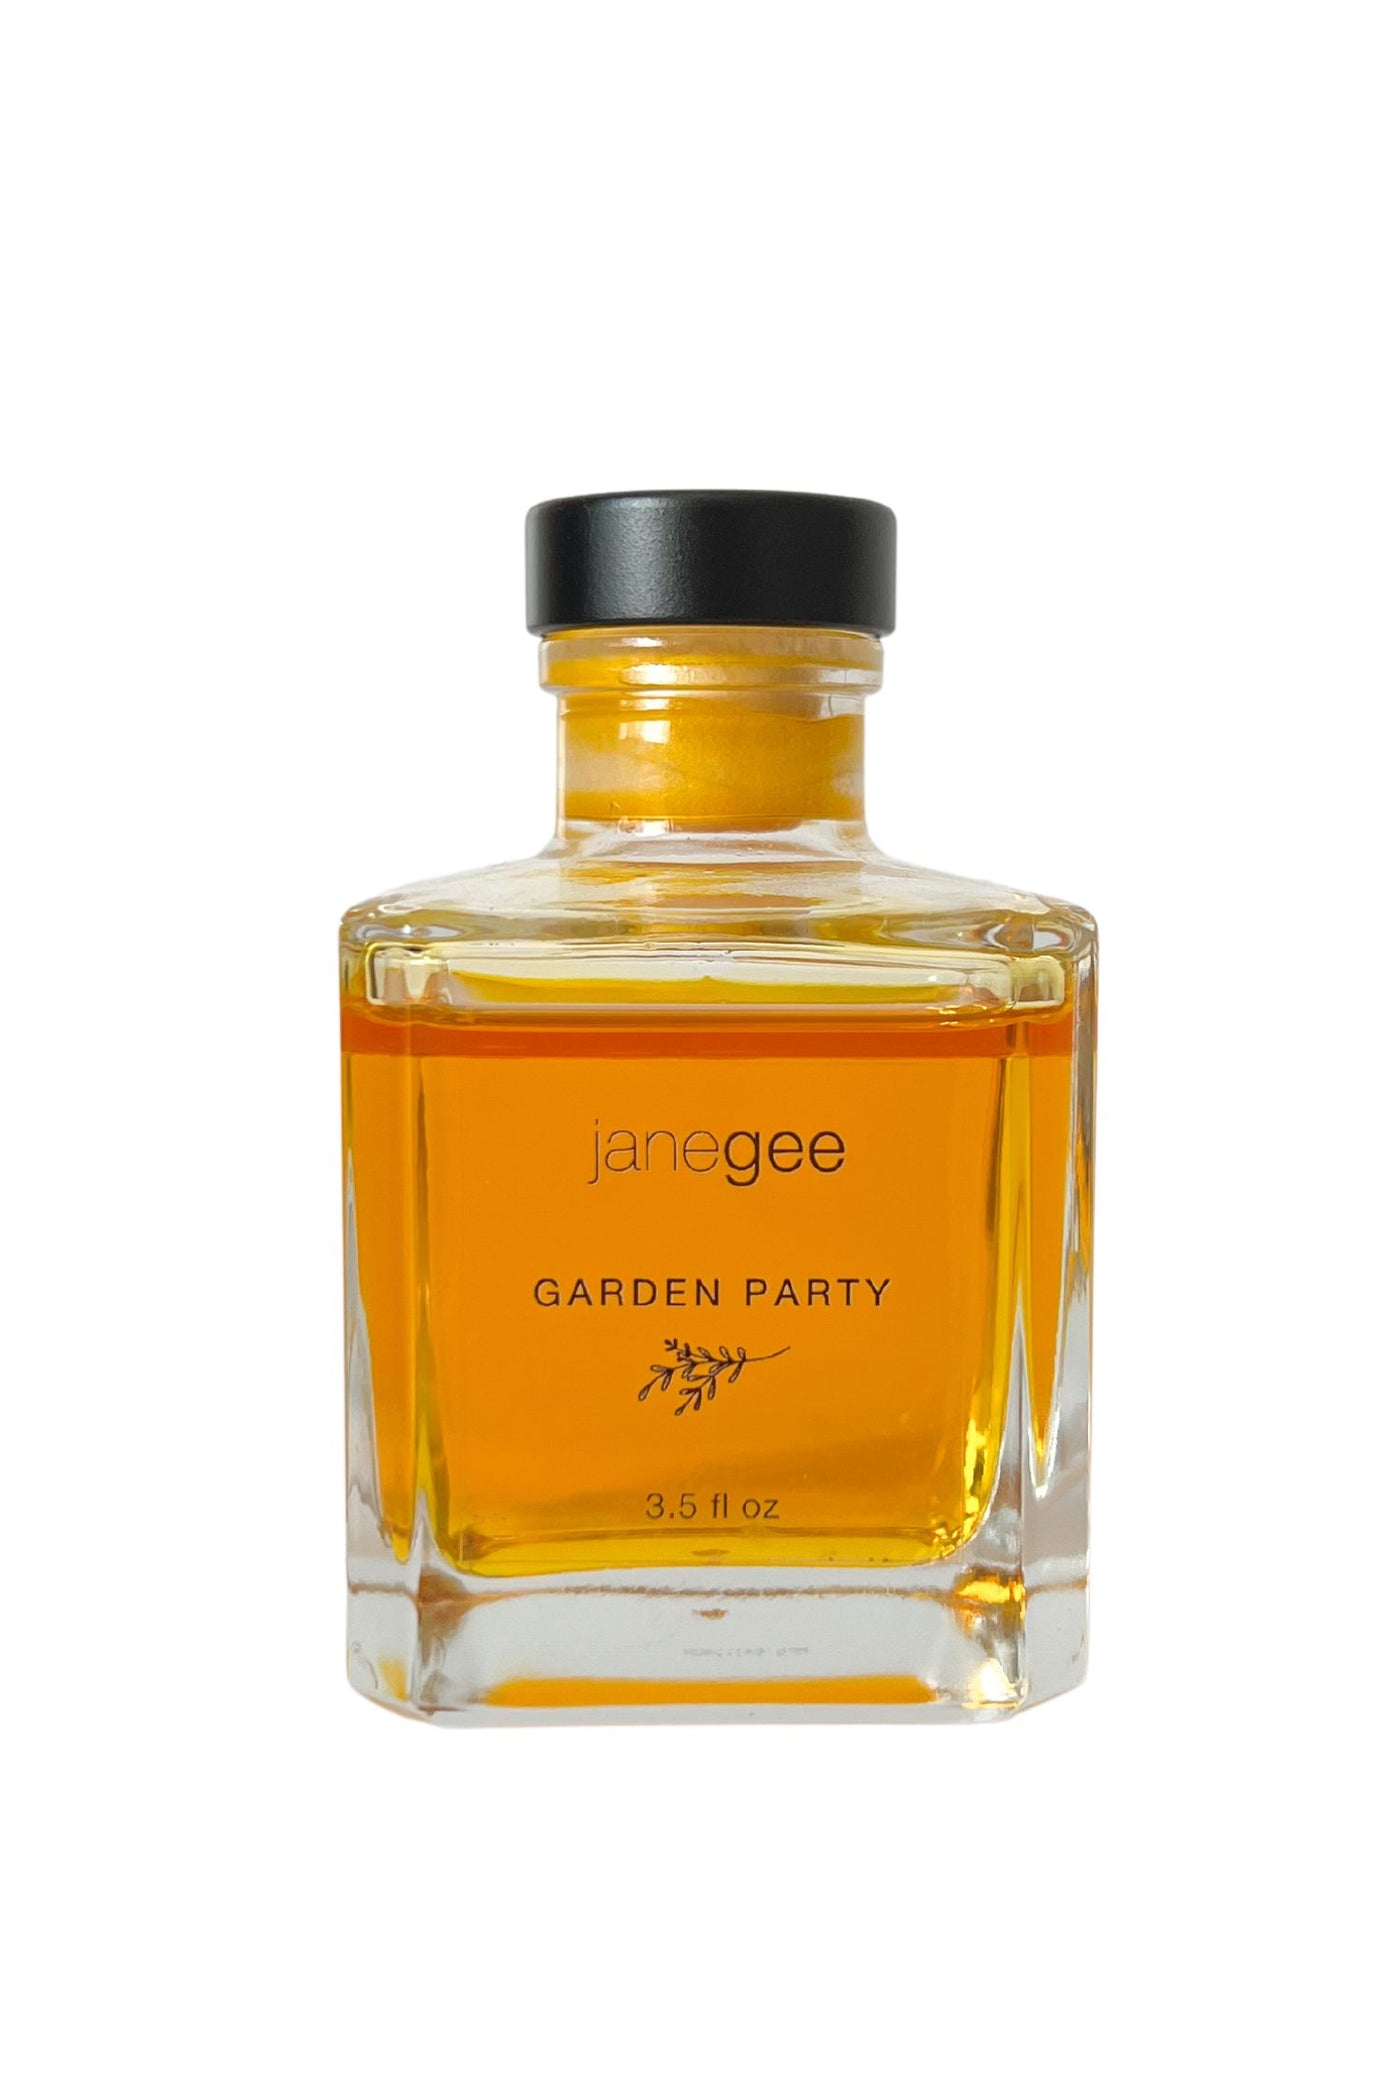 janegee Garden Party Reed Diffuser